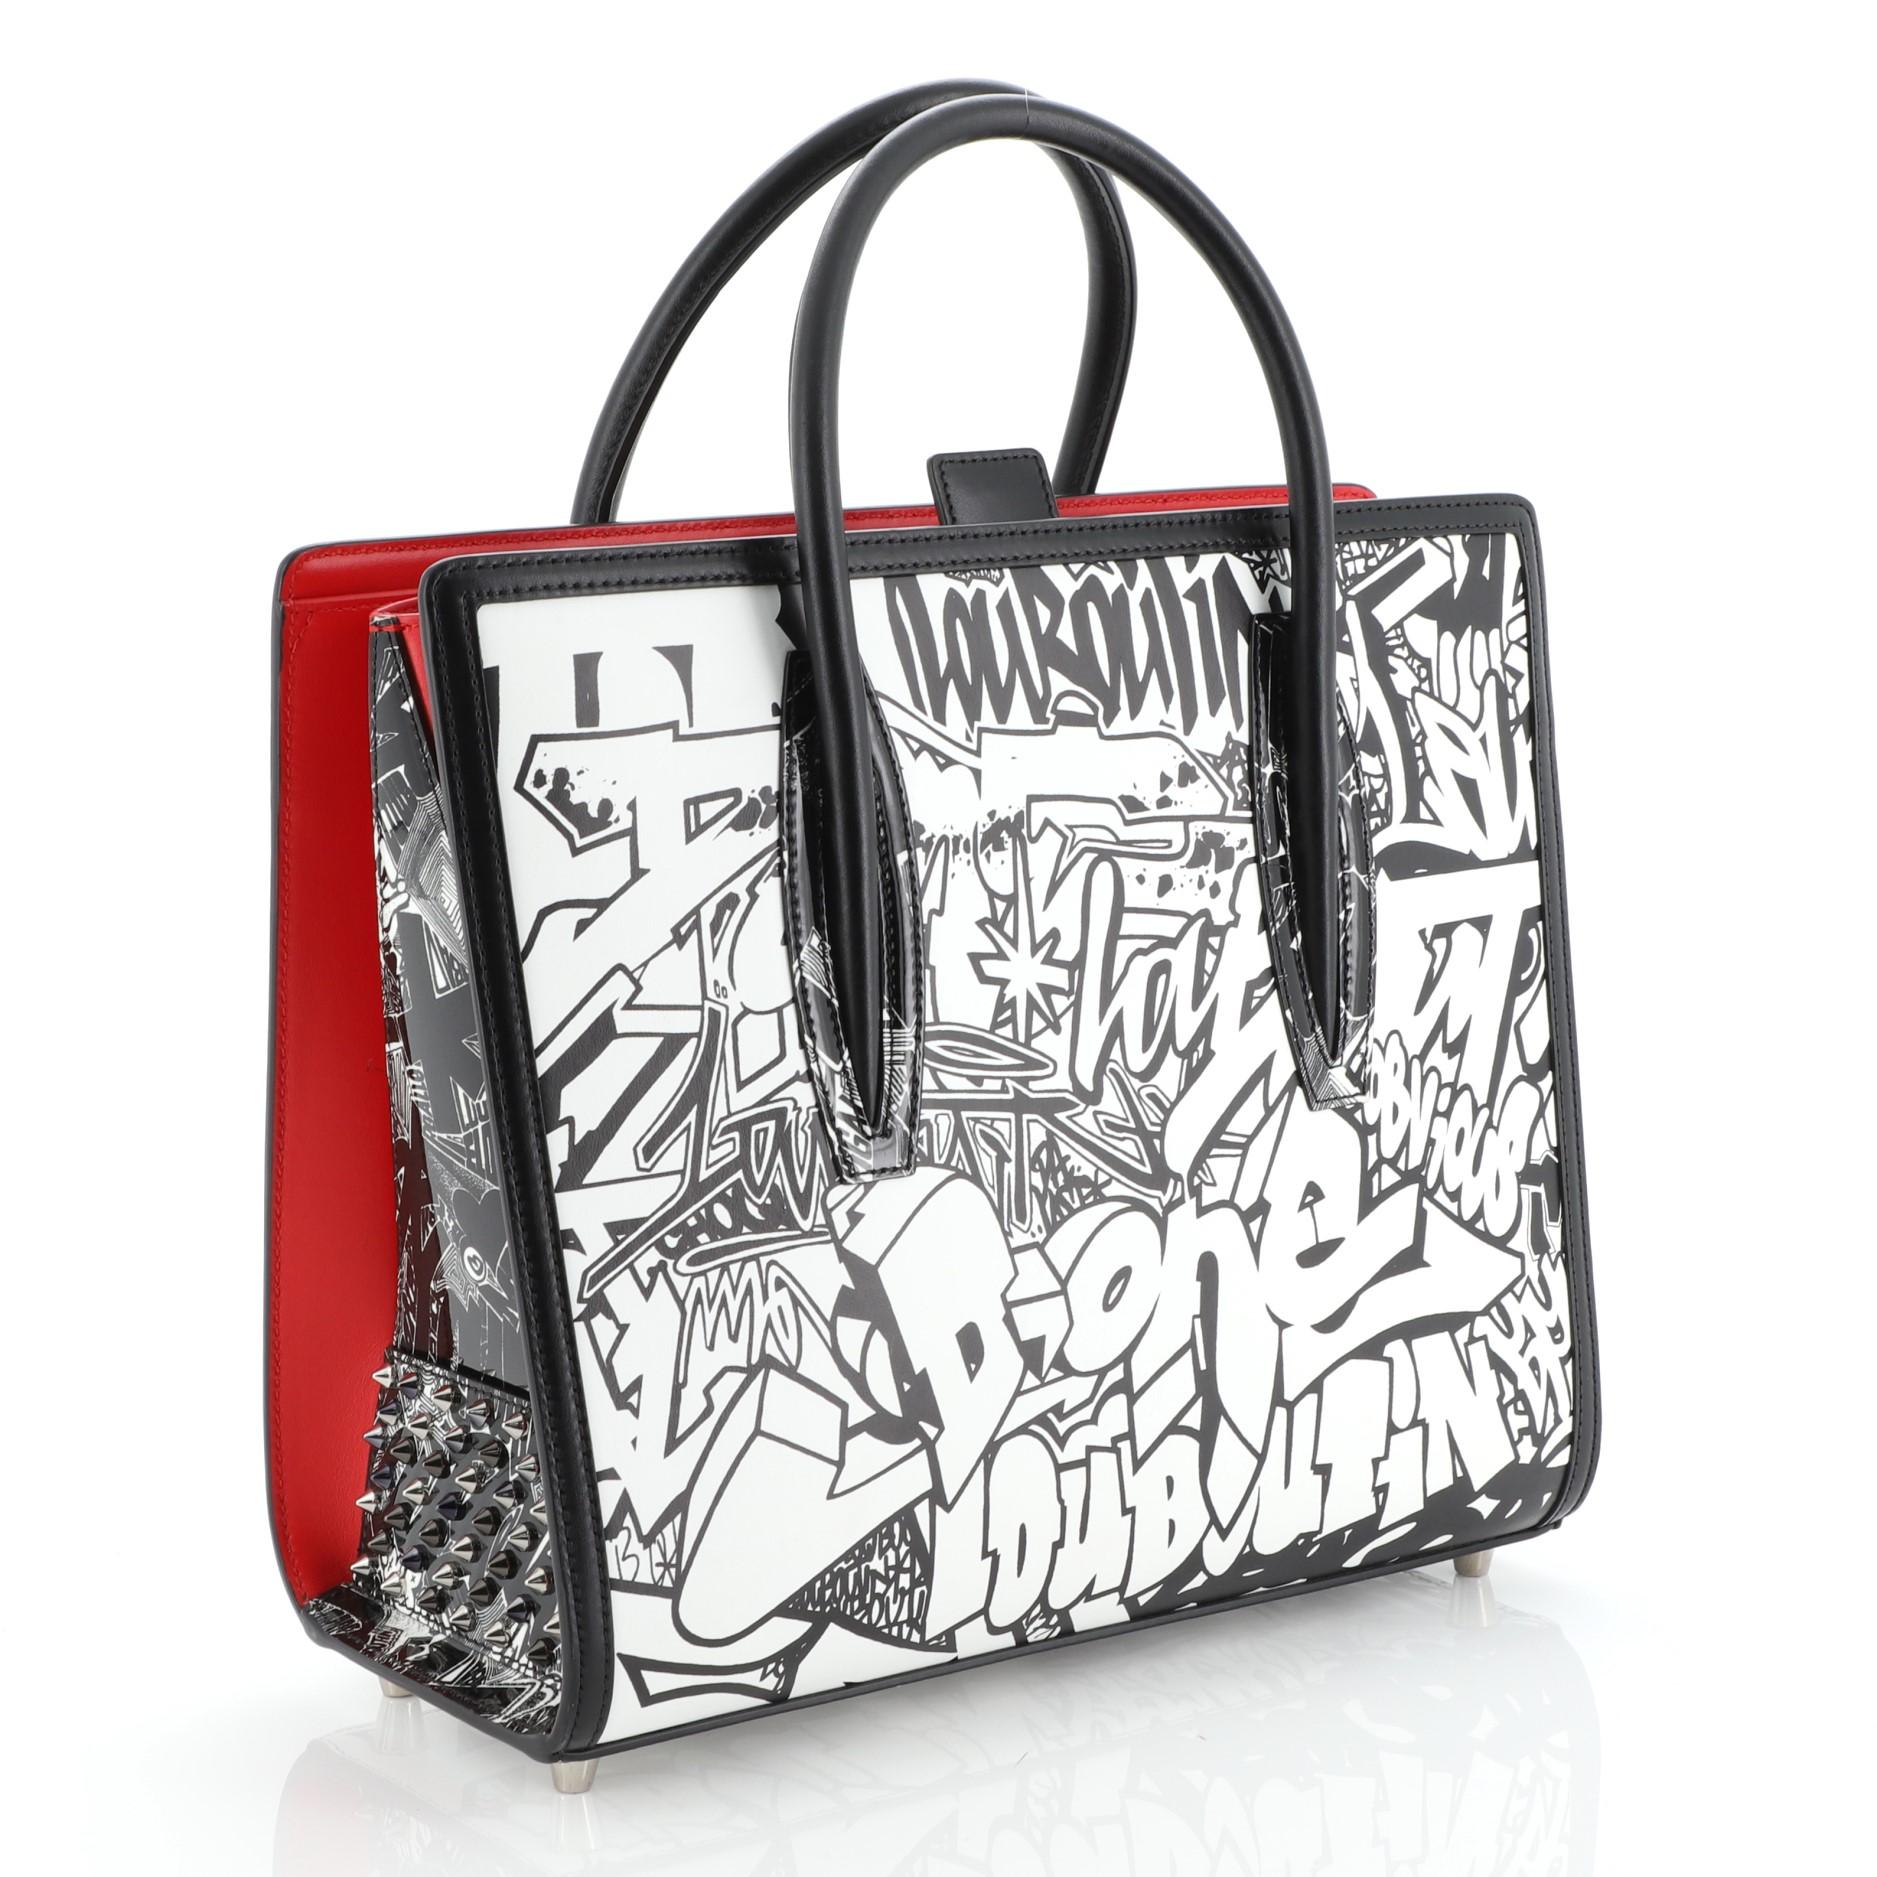 This Christian Louboutin Paloma Tote Printed Leather Medium, crafted in black and white printed leather, features dual rolled leather handles, spiked leather on the sides, protective base studs, and silver-tone hardware. Its tab closure opens to a